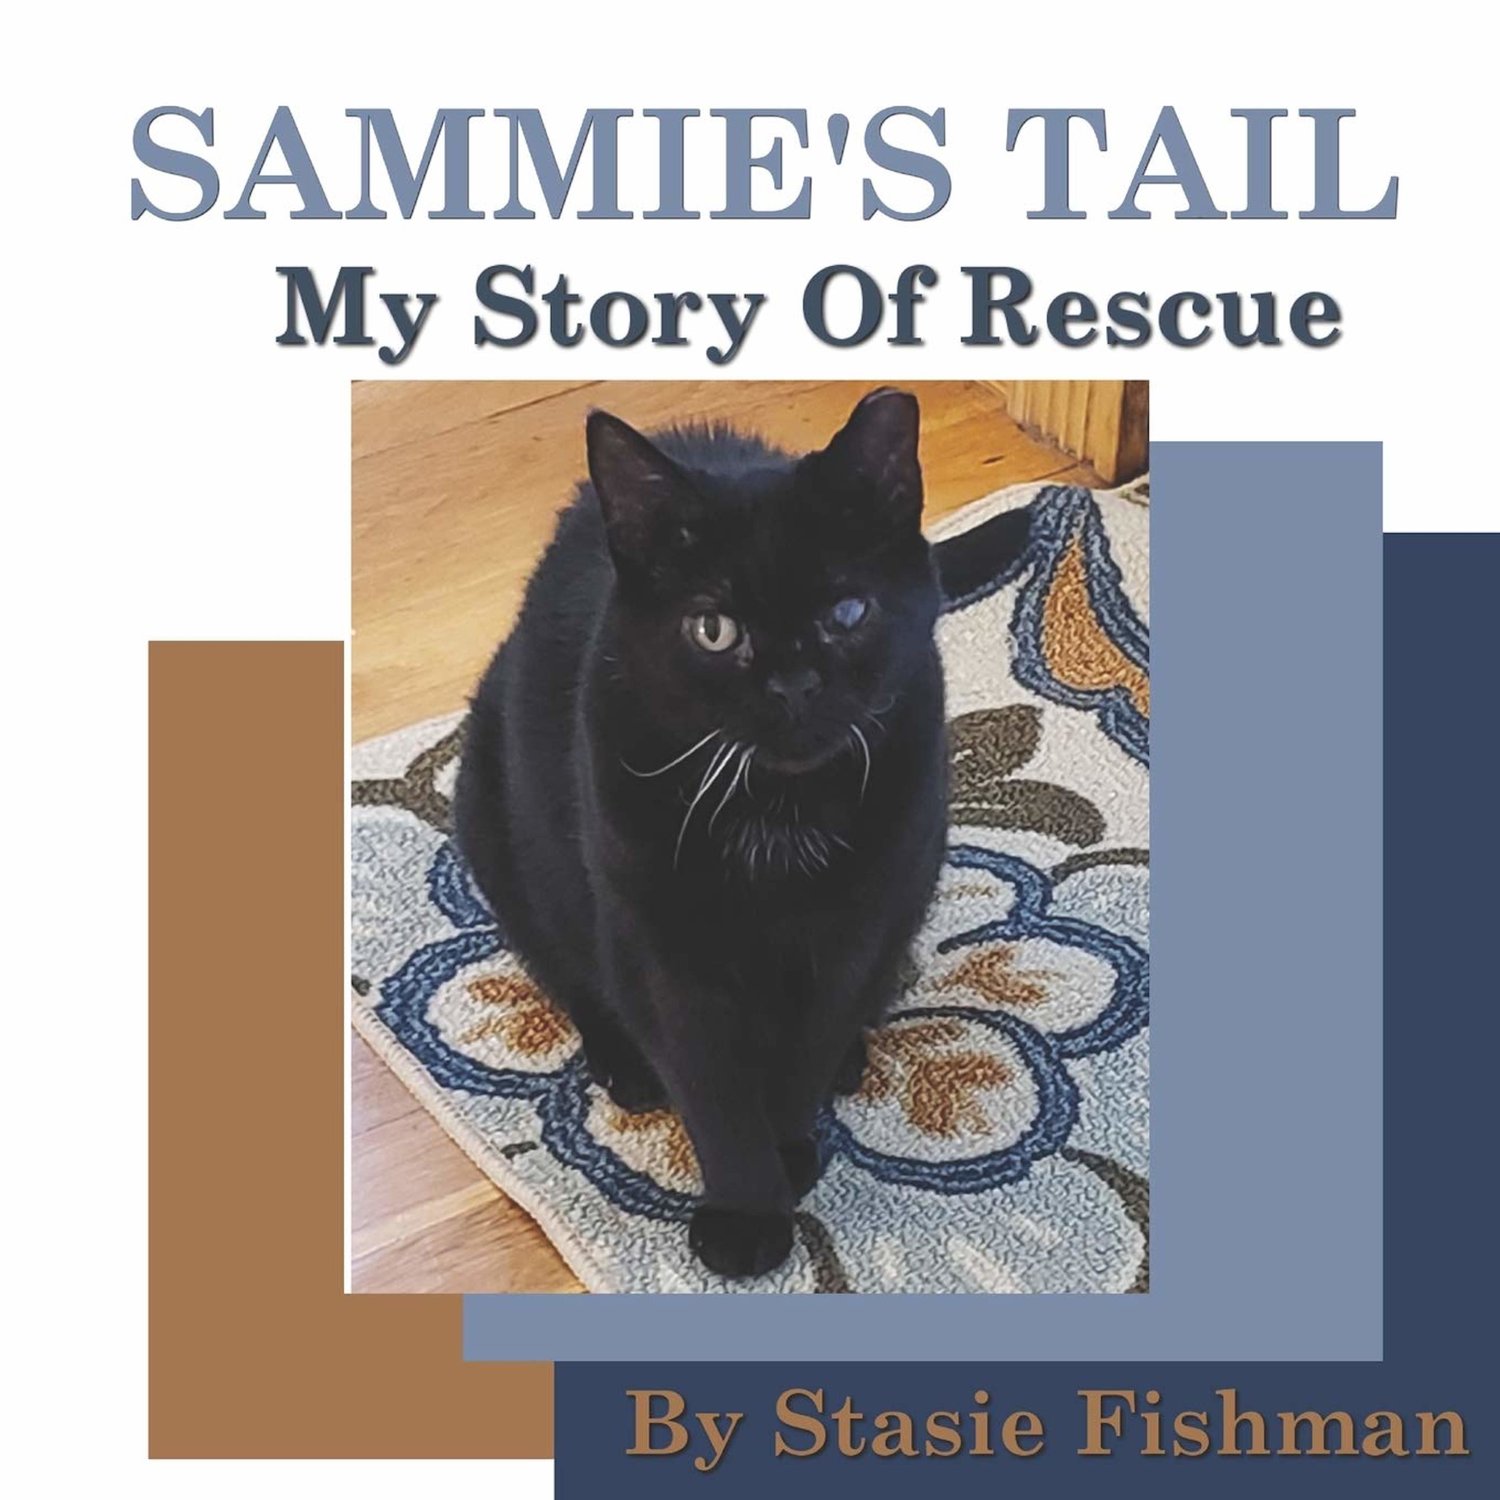 Fishman’s other book, “Sammie’s Tail,” features Sammie, a rescue cat who is blind in one eye.